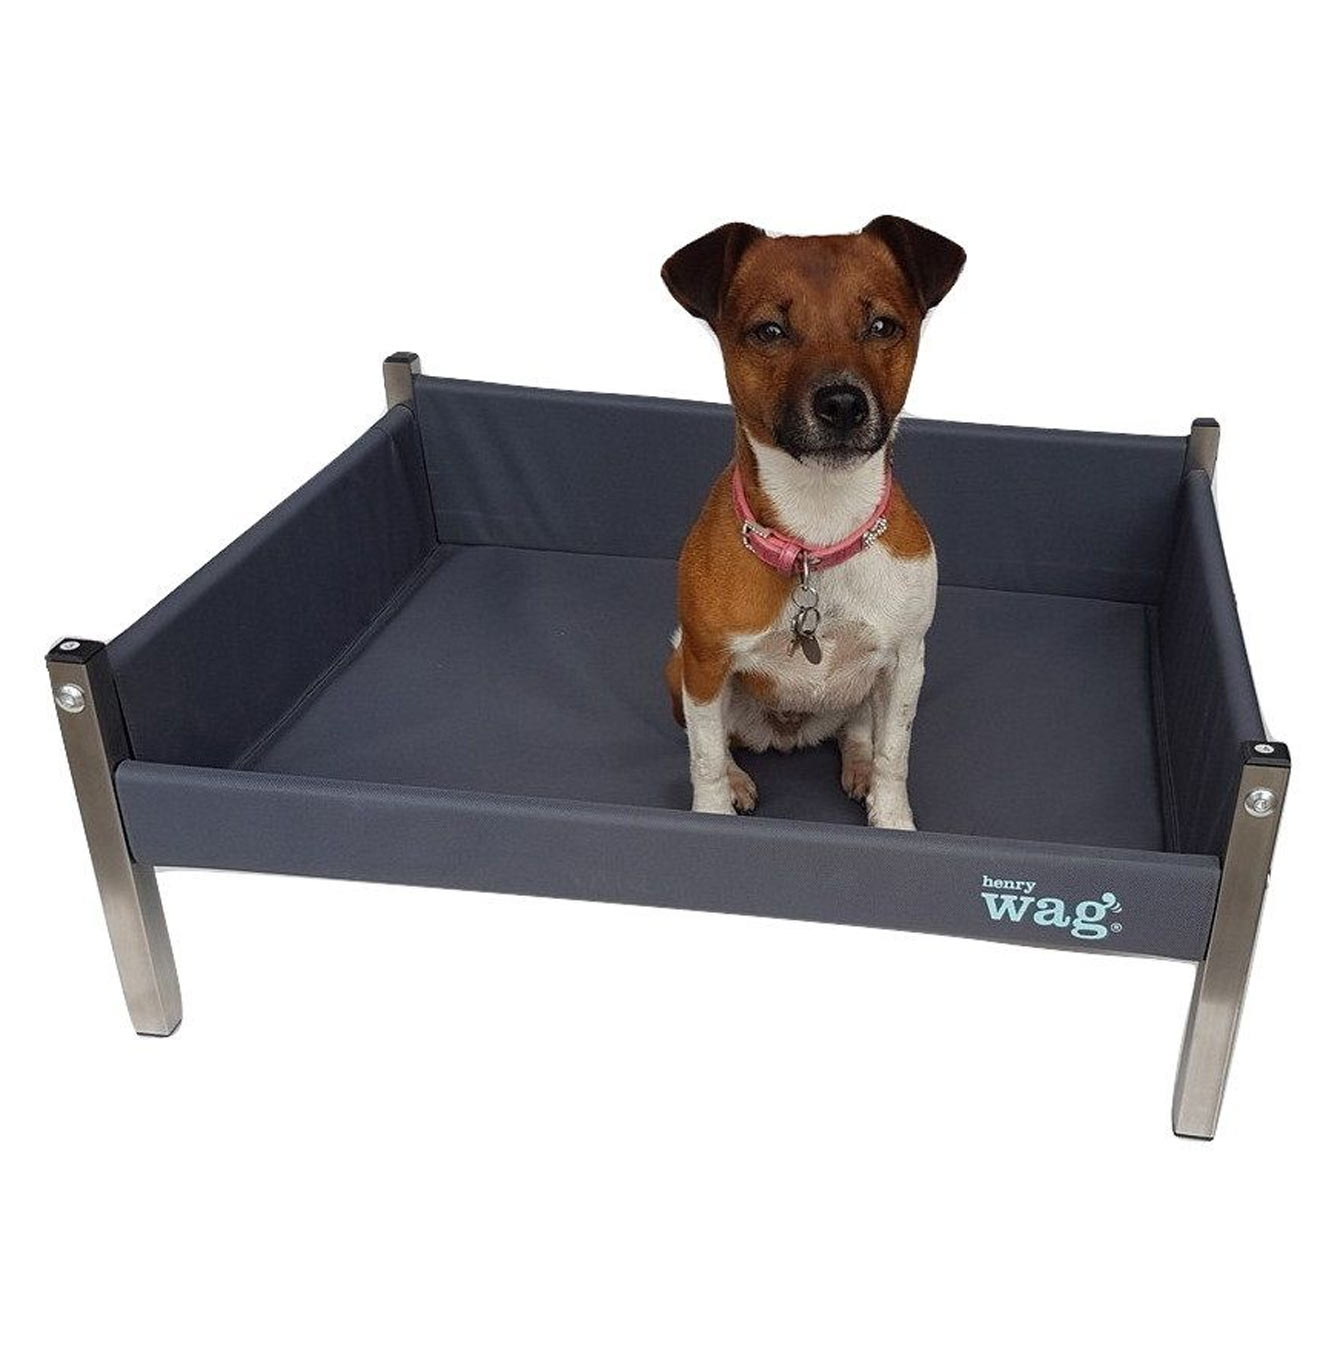 Henry Wag Elevated Dog Bed Studio With Dog